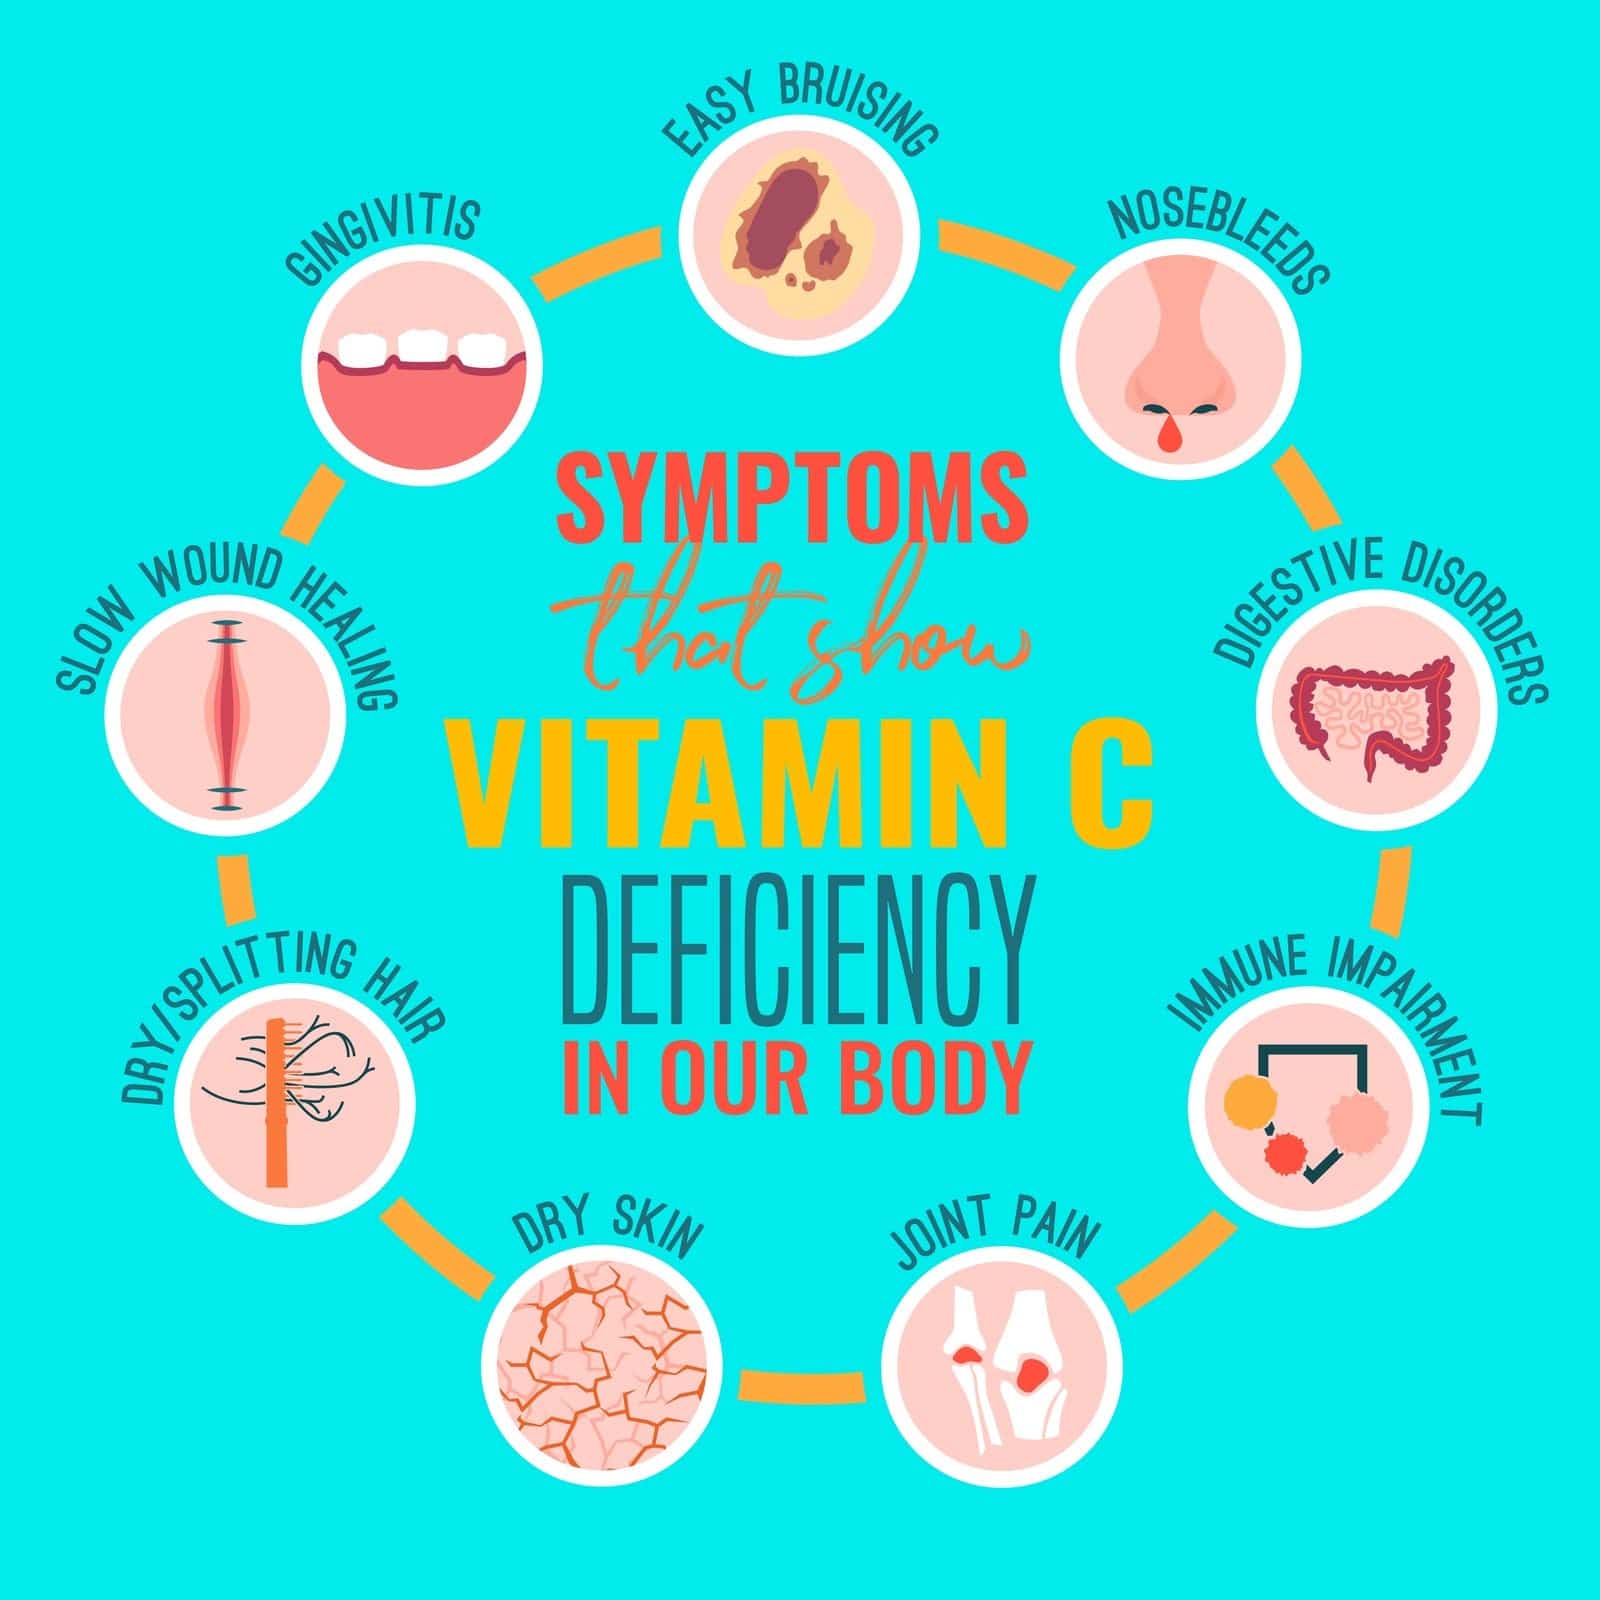 What are Vitamin C Deficiency Symptom &  How to Improve It?